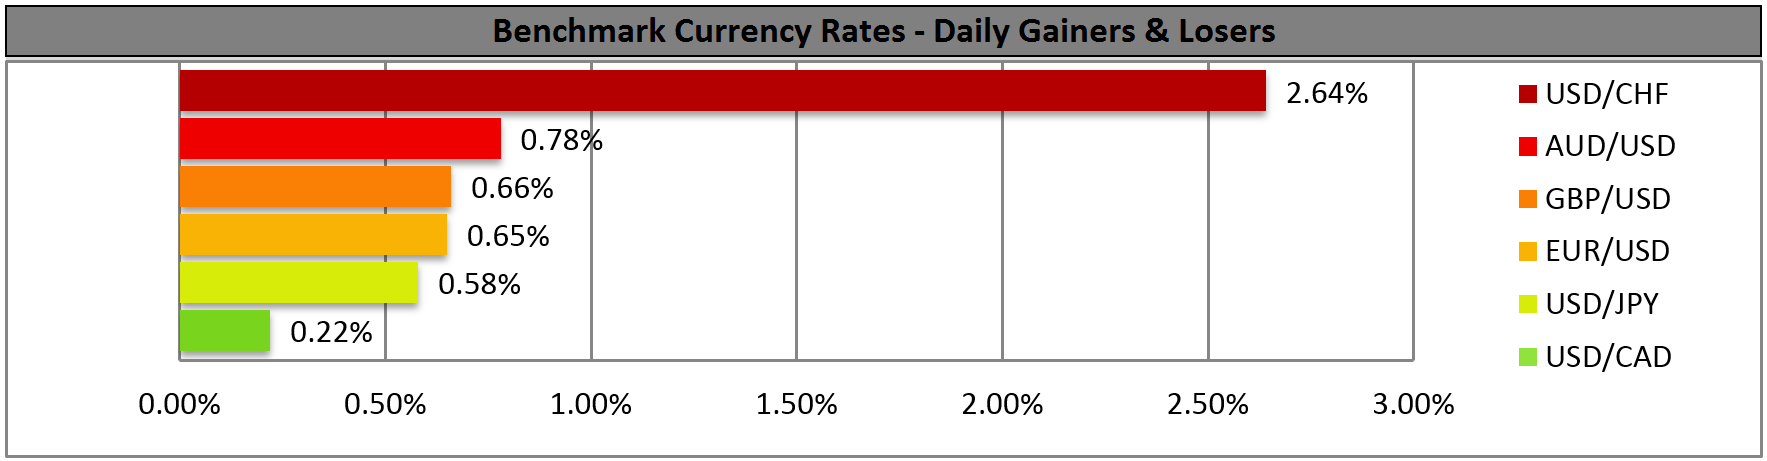 currency rates: Daily Gainers and Losers